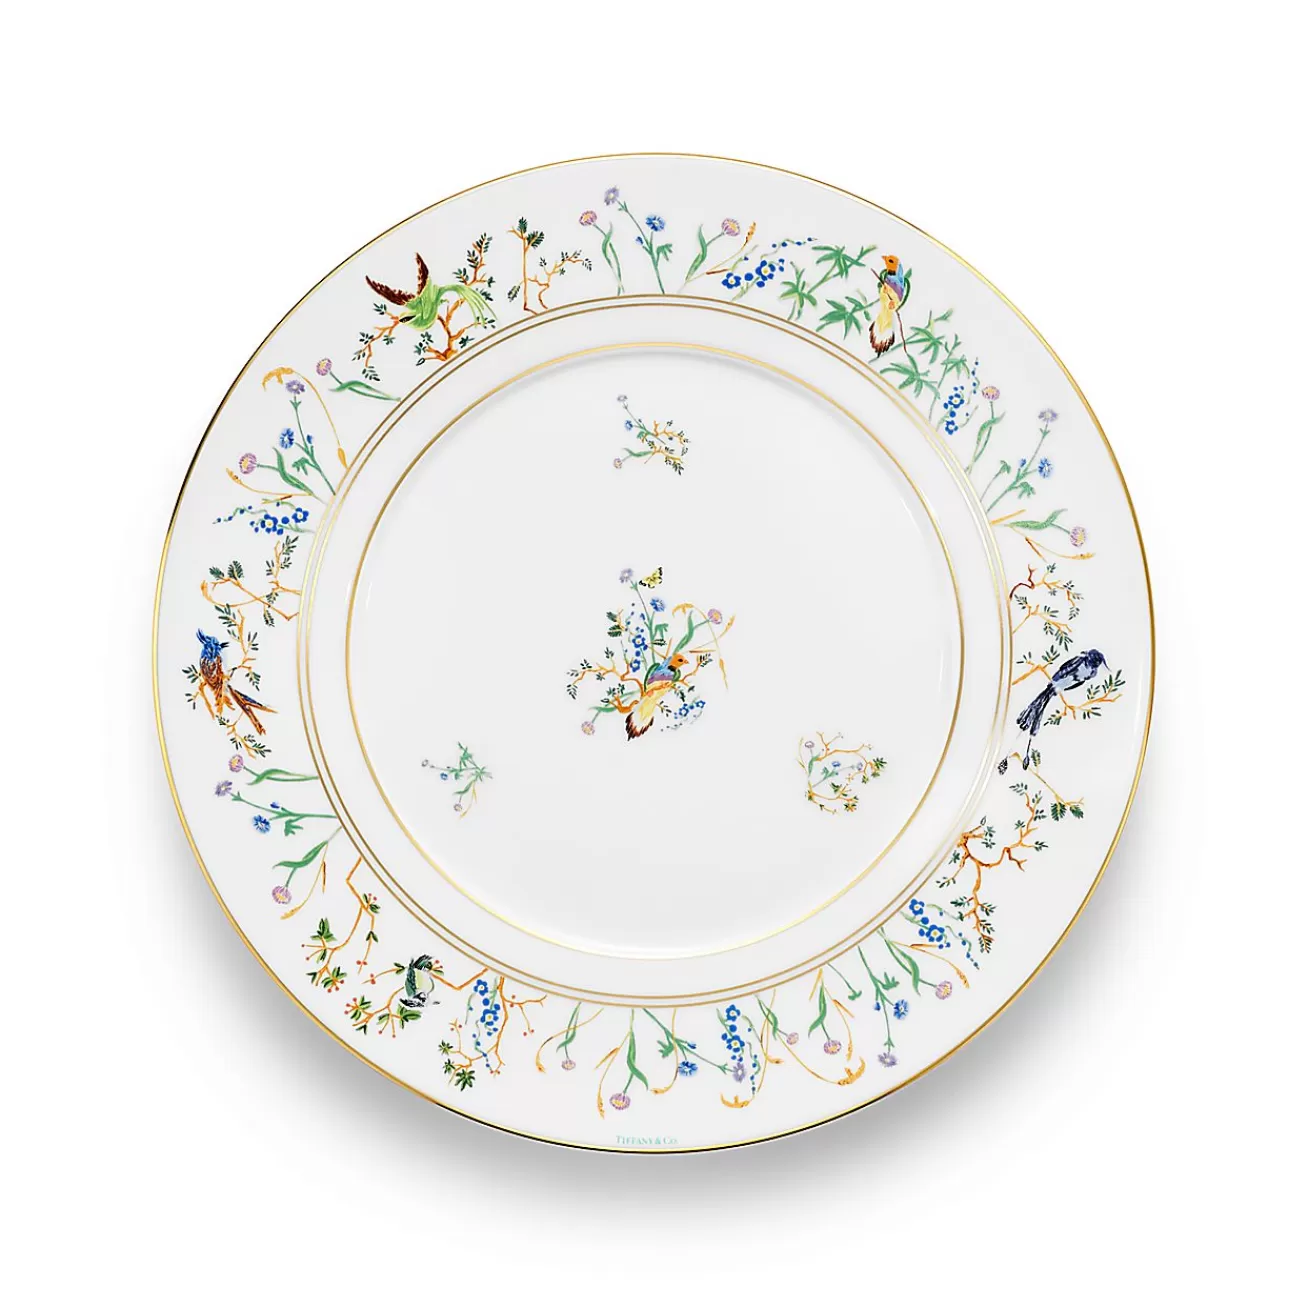 Tiffany & Co. Tiffany Jardin Dinner Plate in Porcelain | ^ The Home | Housewarming Gifts